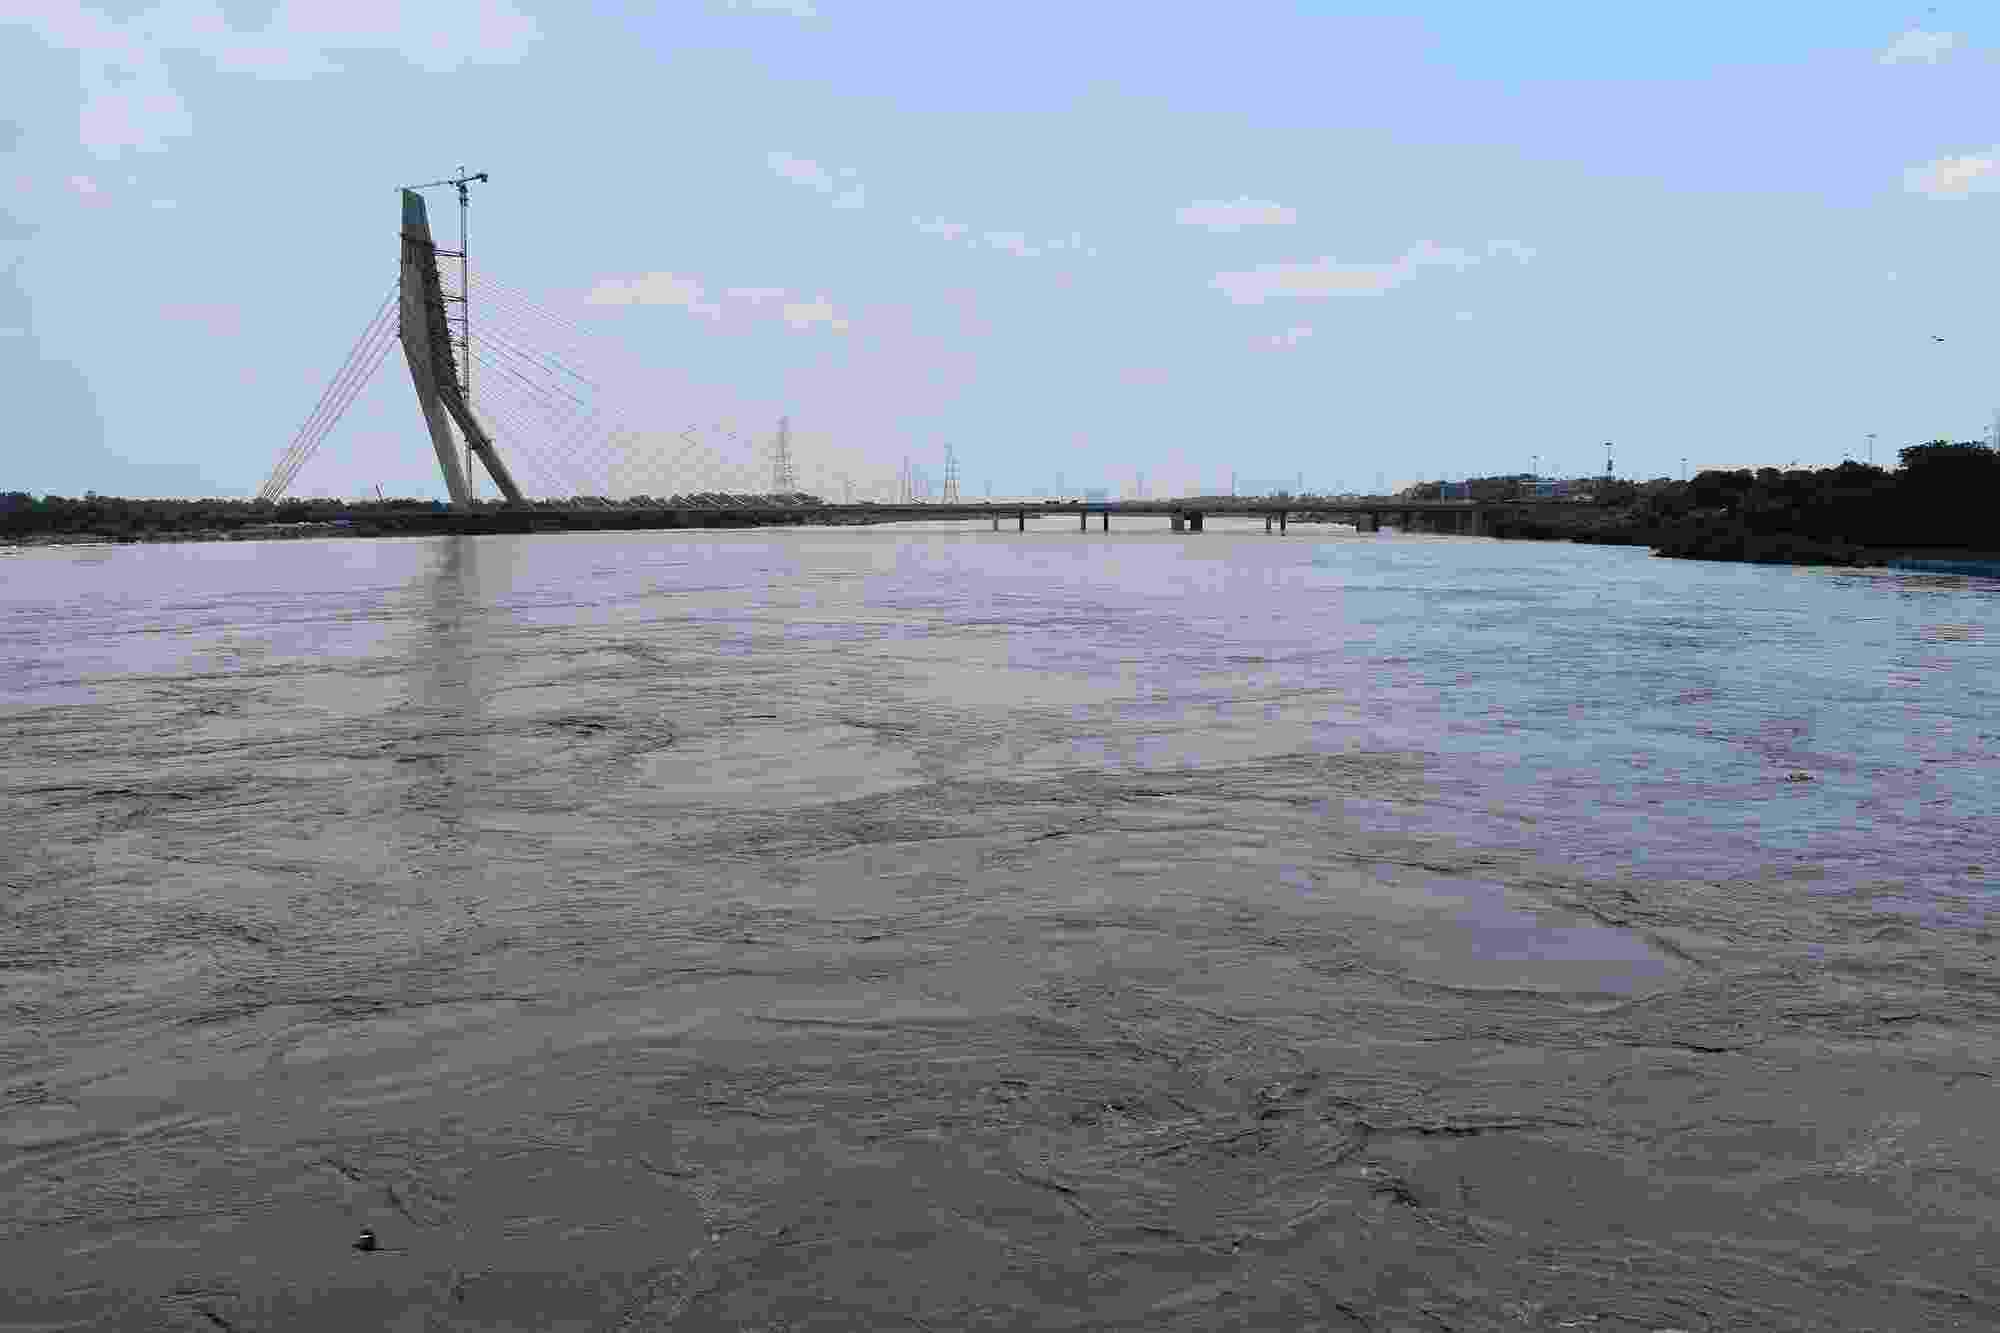 The flooded expanse of the Yamuna River fills the photo, with the Signature Bridge crossing the river and parts of Delhi's skyline visible in the distance 